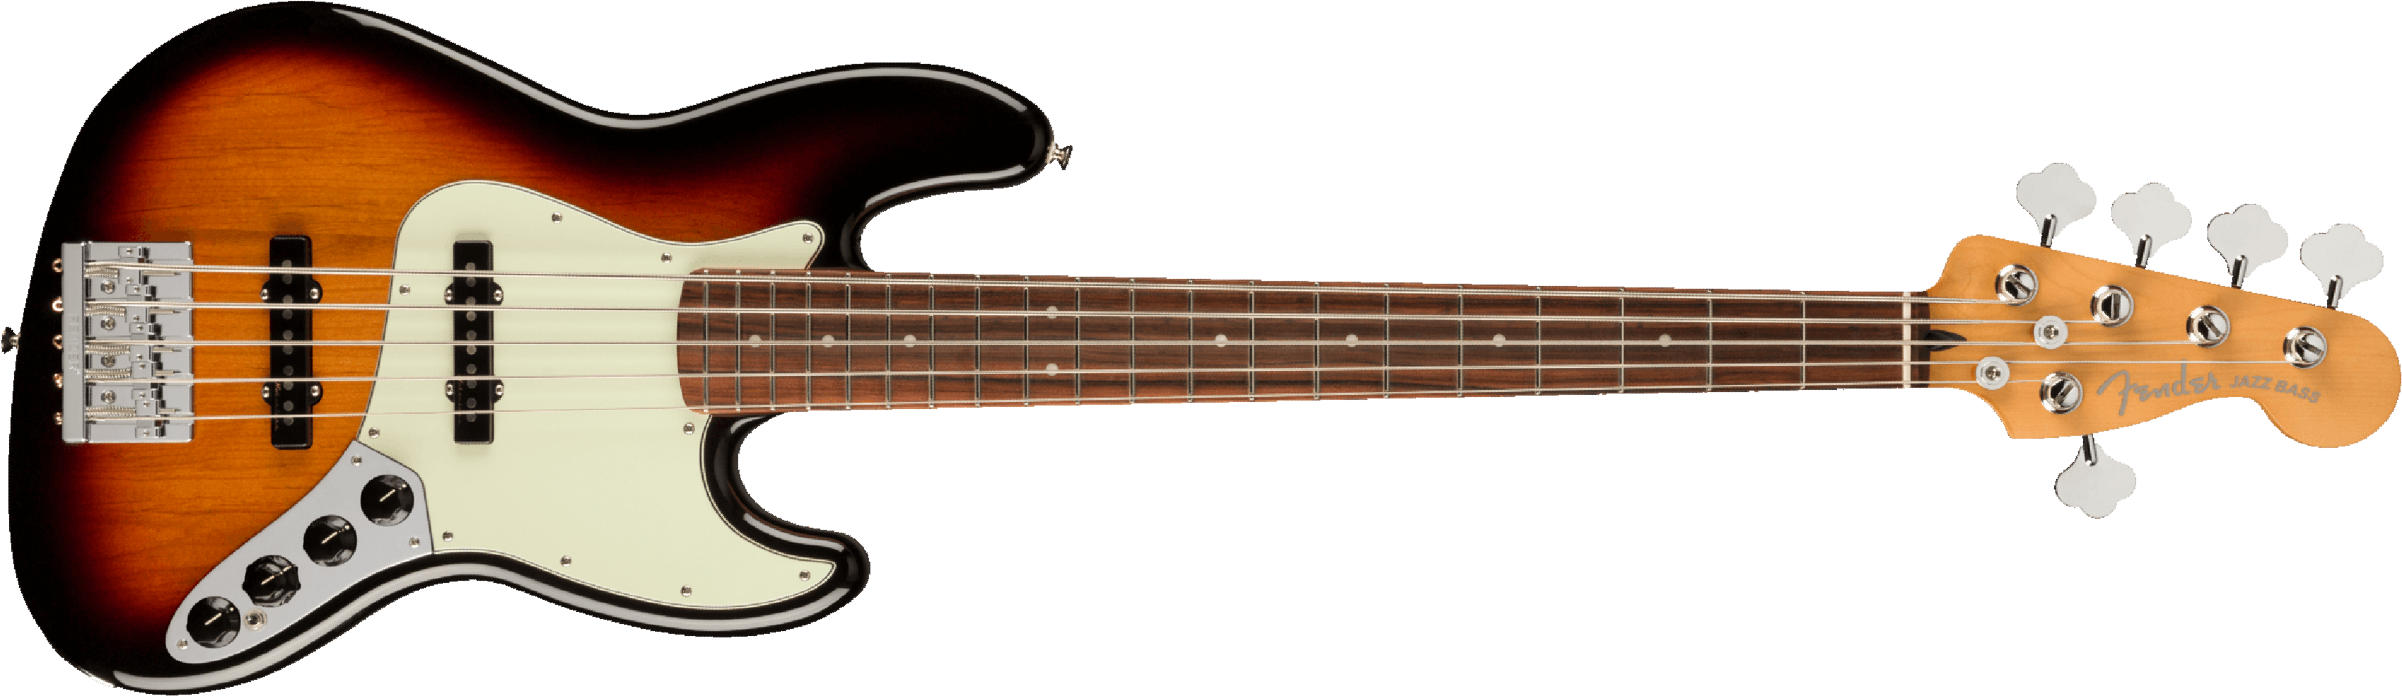 Fender Jazz Bass Player Plus V Mex 5c Active Pf - 3-color Sunburst - Solid body electric bass - Main picture